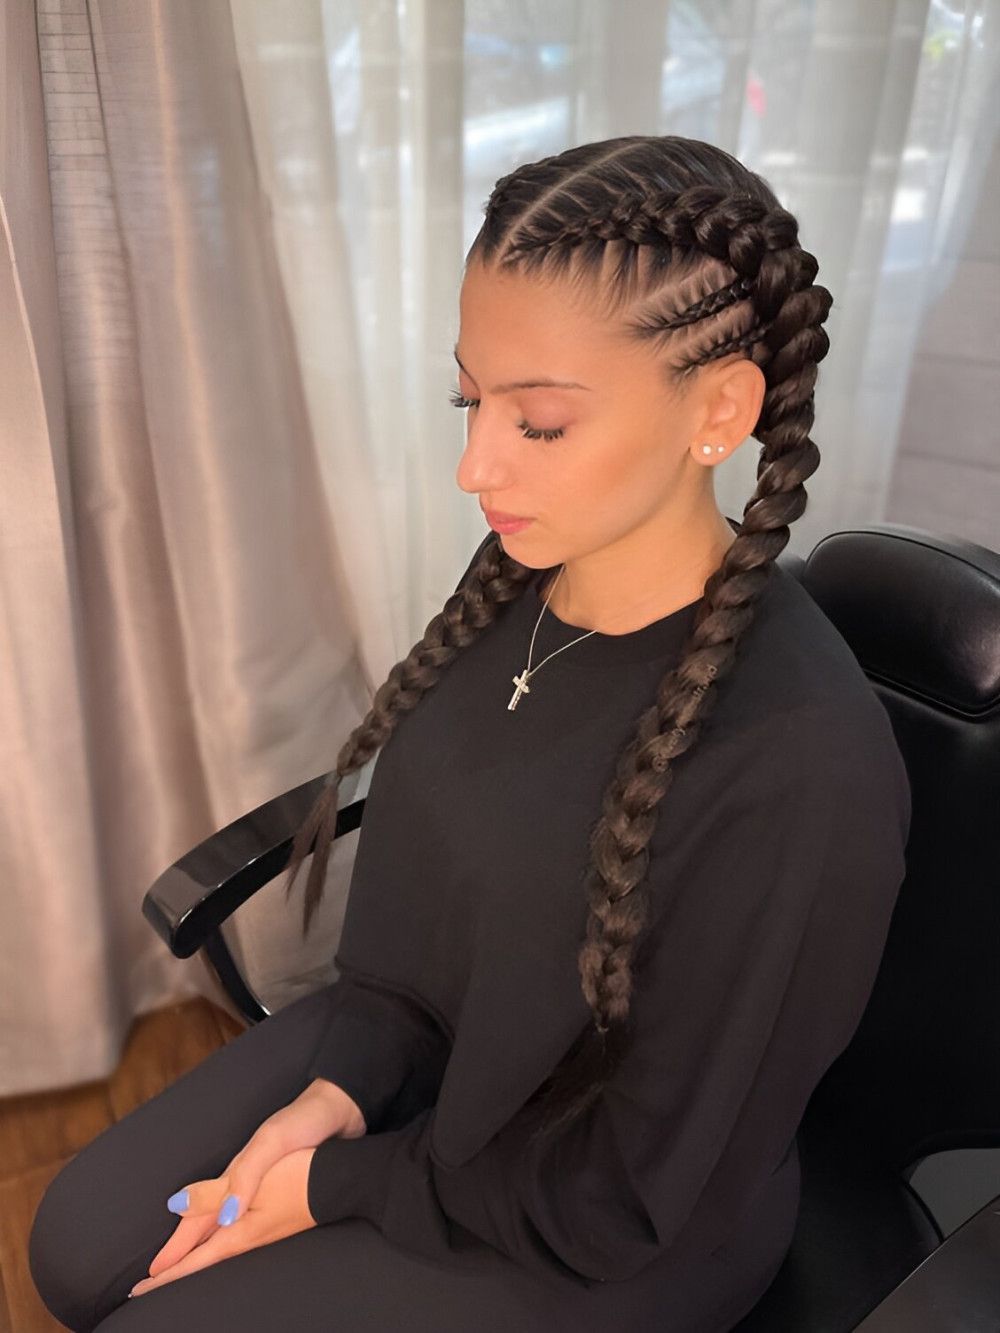 Braids: A Timeless Trend in Hairstyling